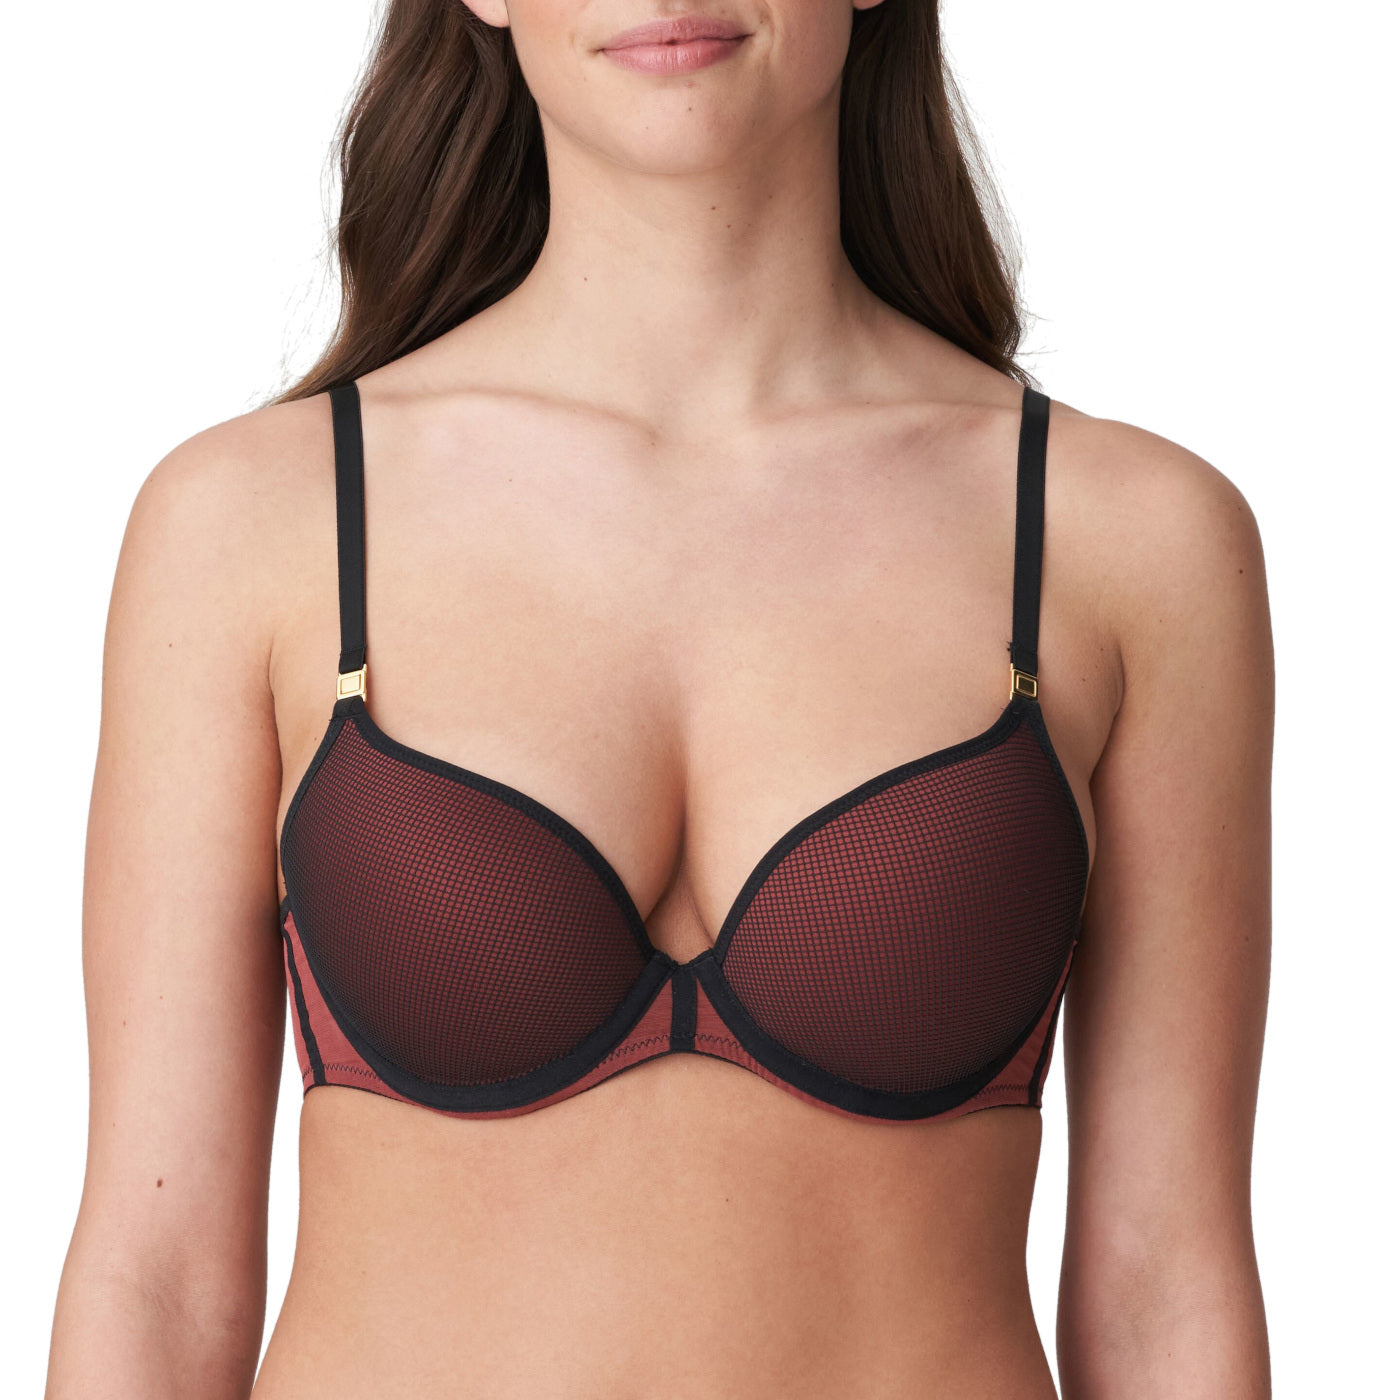 20 Fabulous Plunge Bras from 32AAA to 50DDD